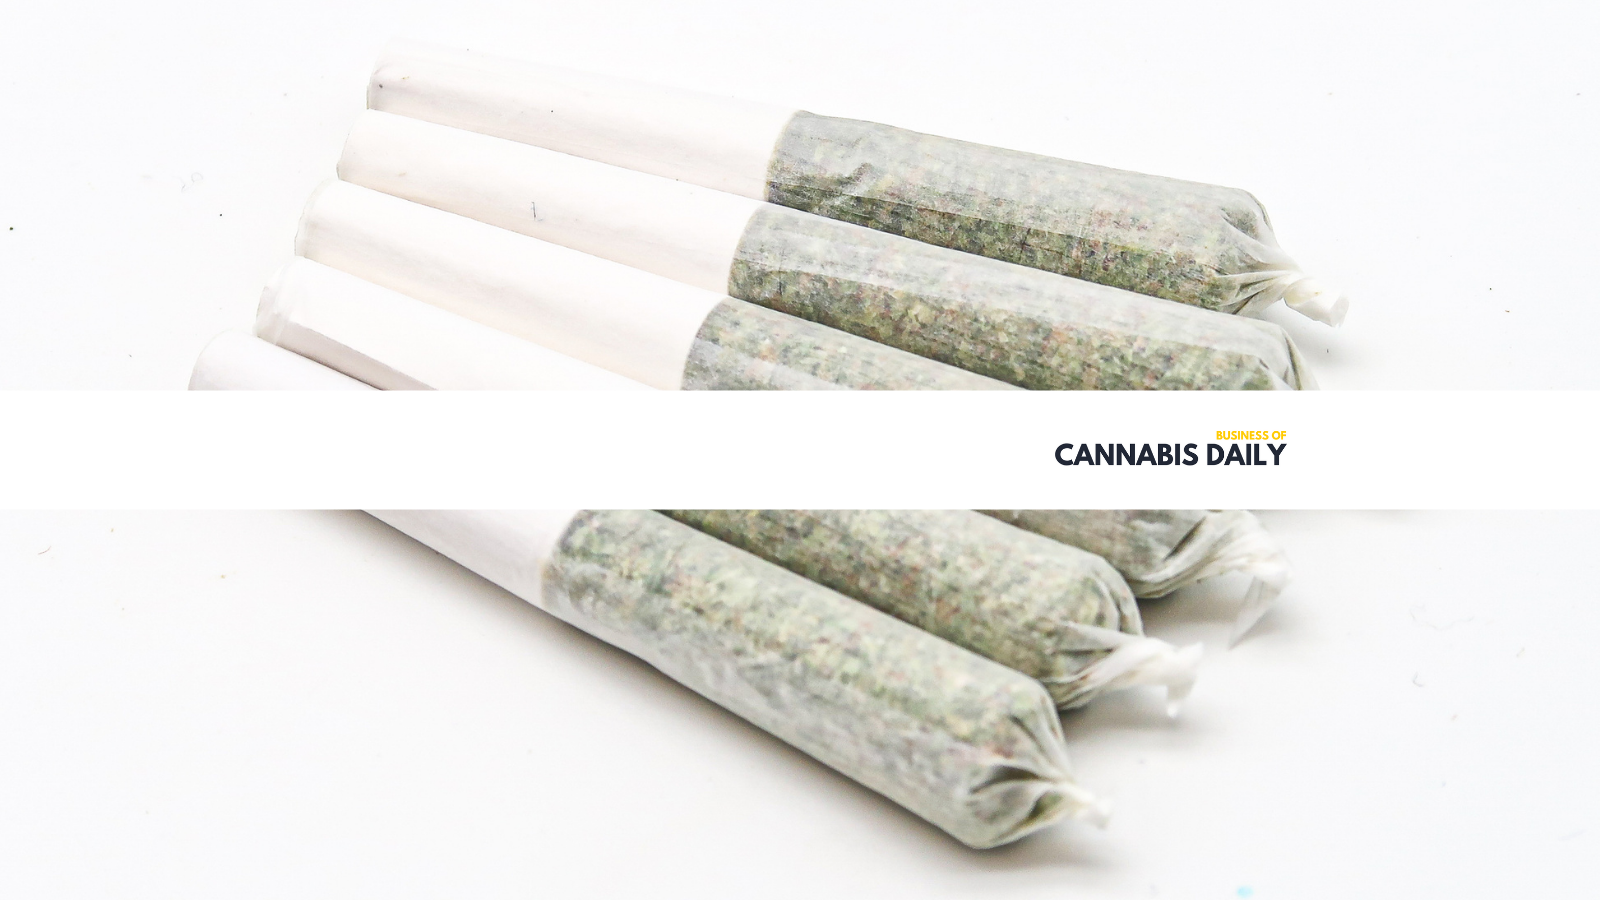 cannabis news focused on the increasing prominence of pre-rolls